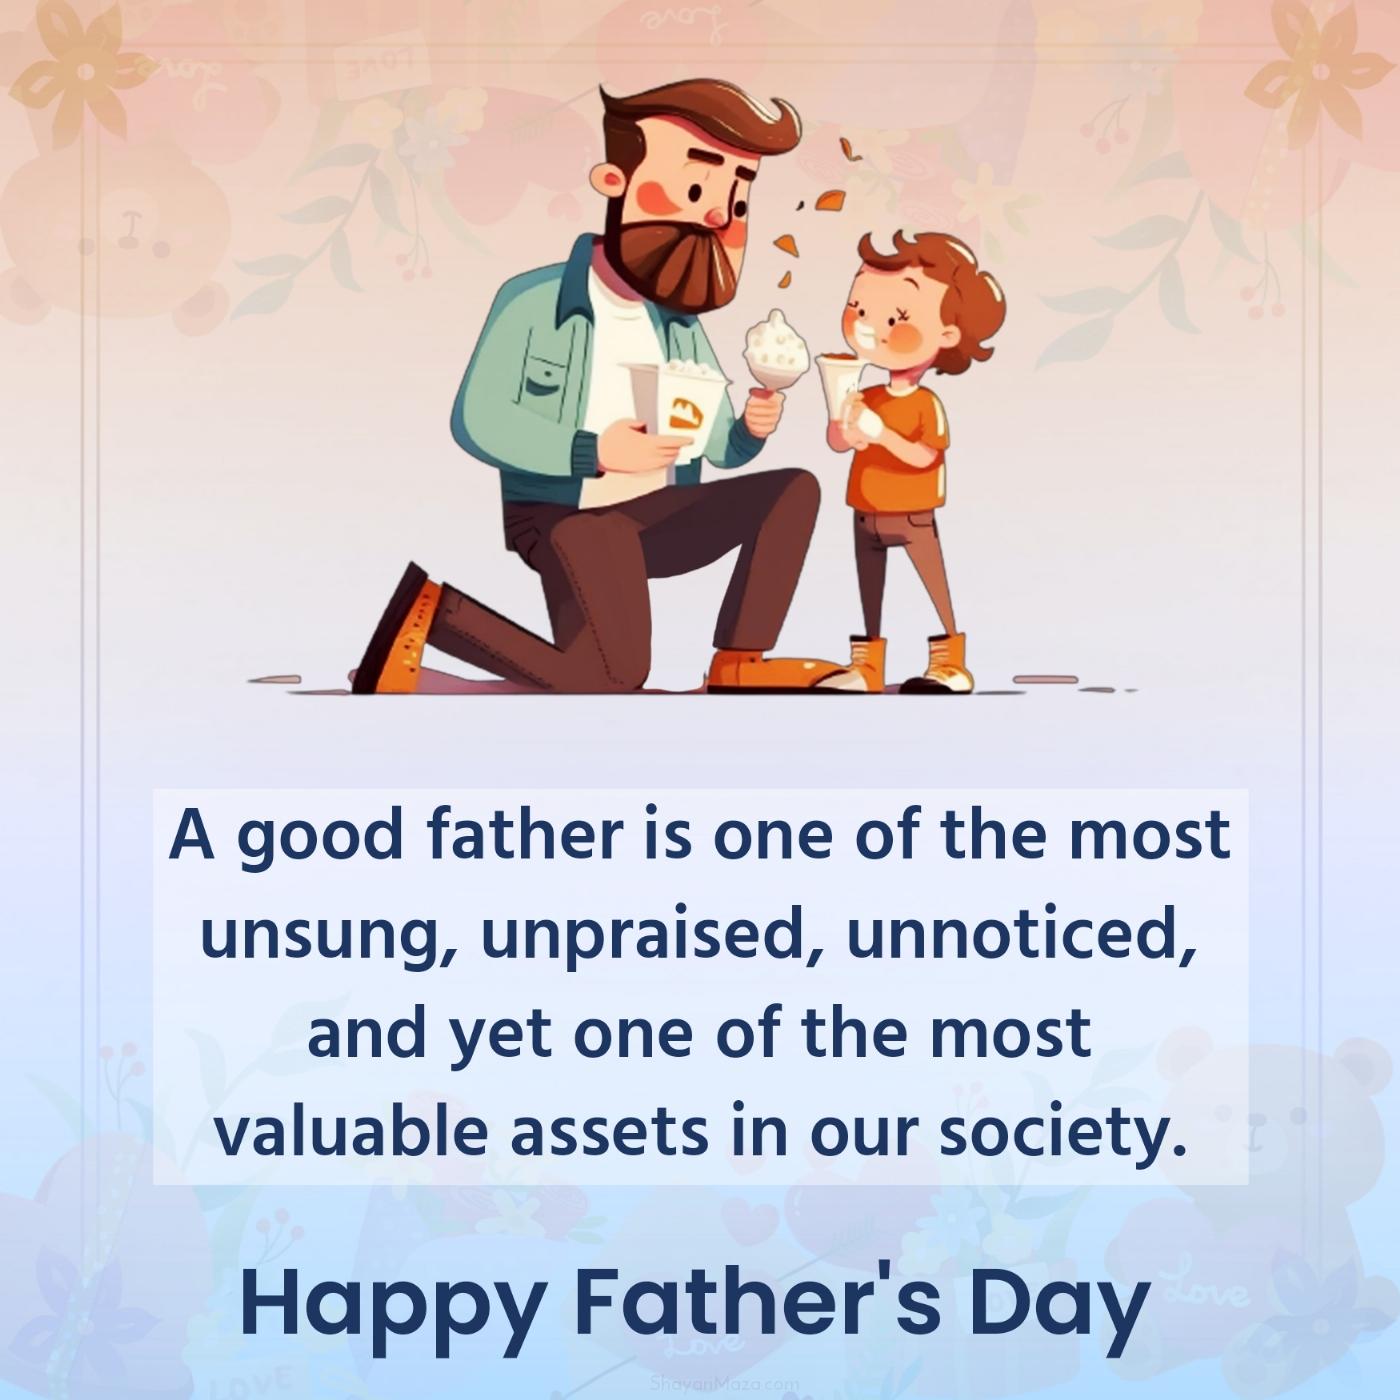 A good father is one of the most unsung unpraised unnoticed